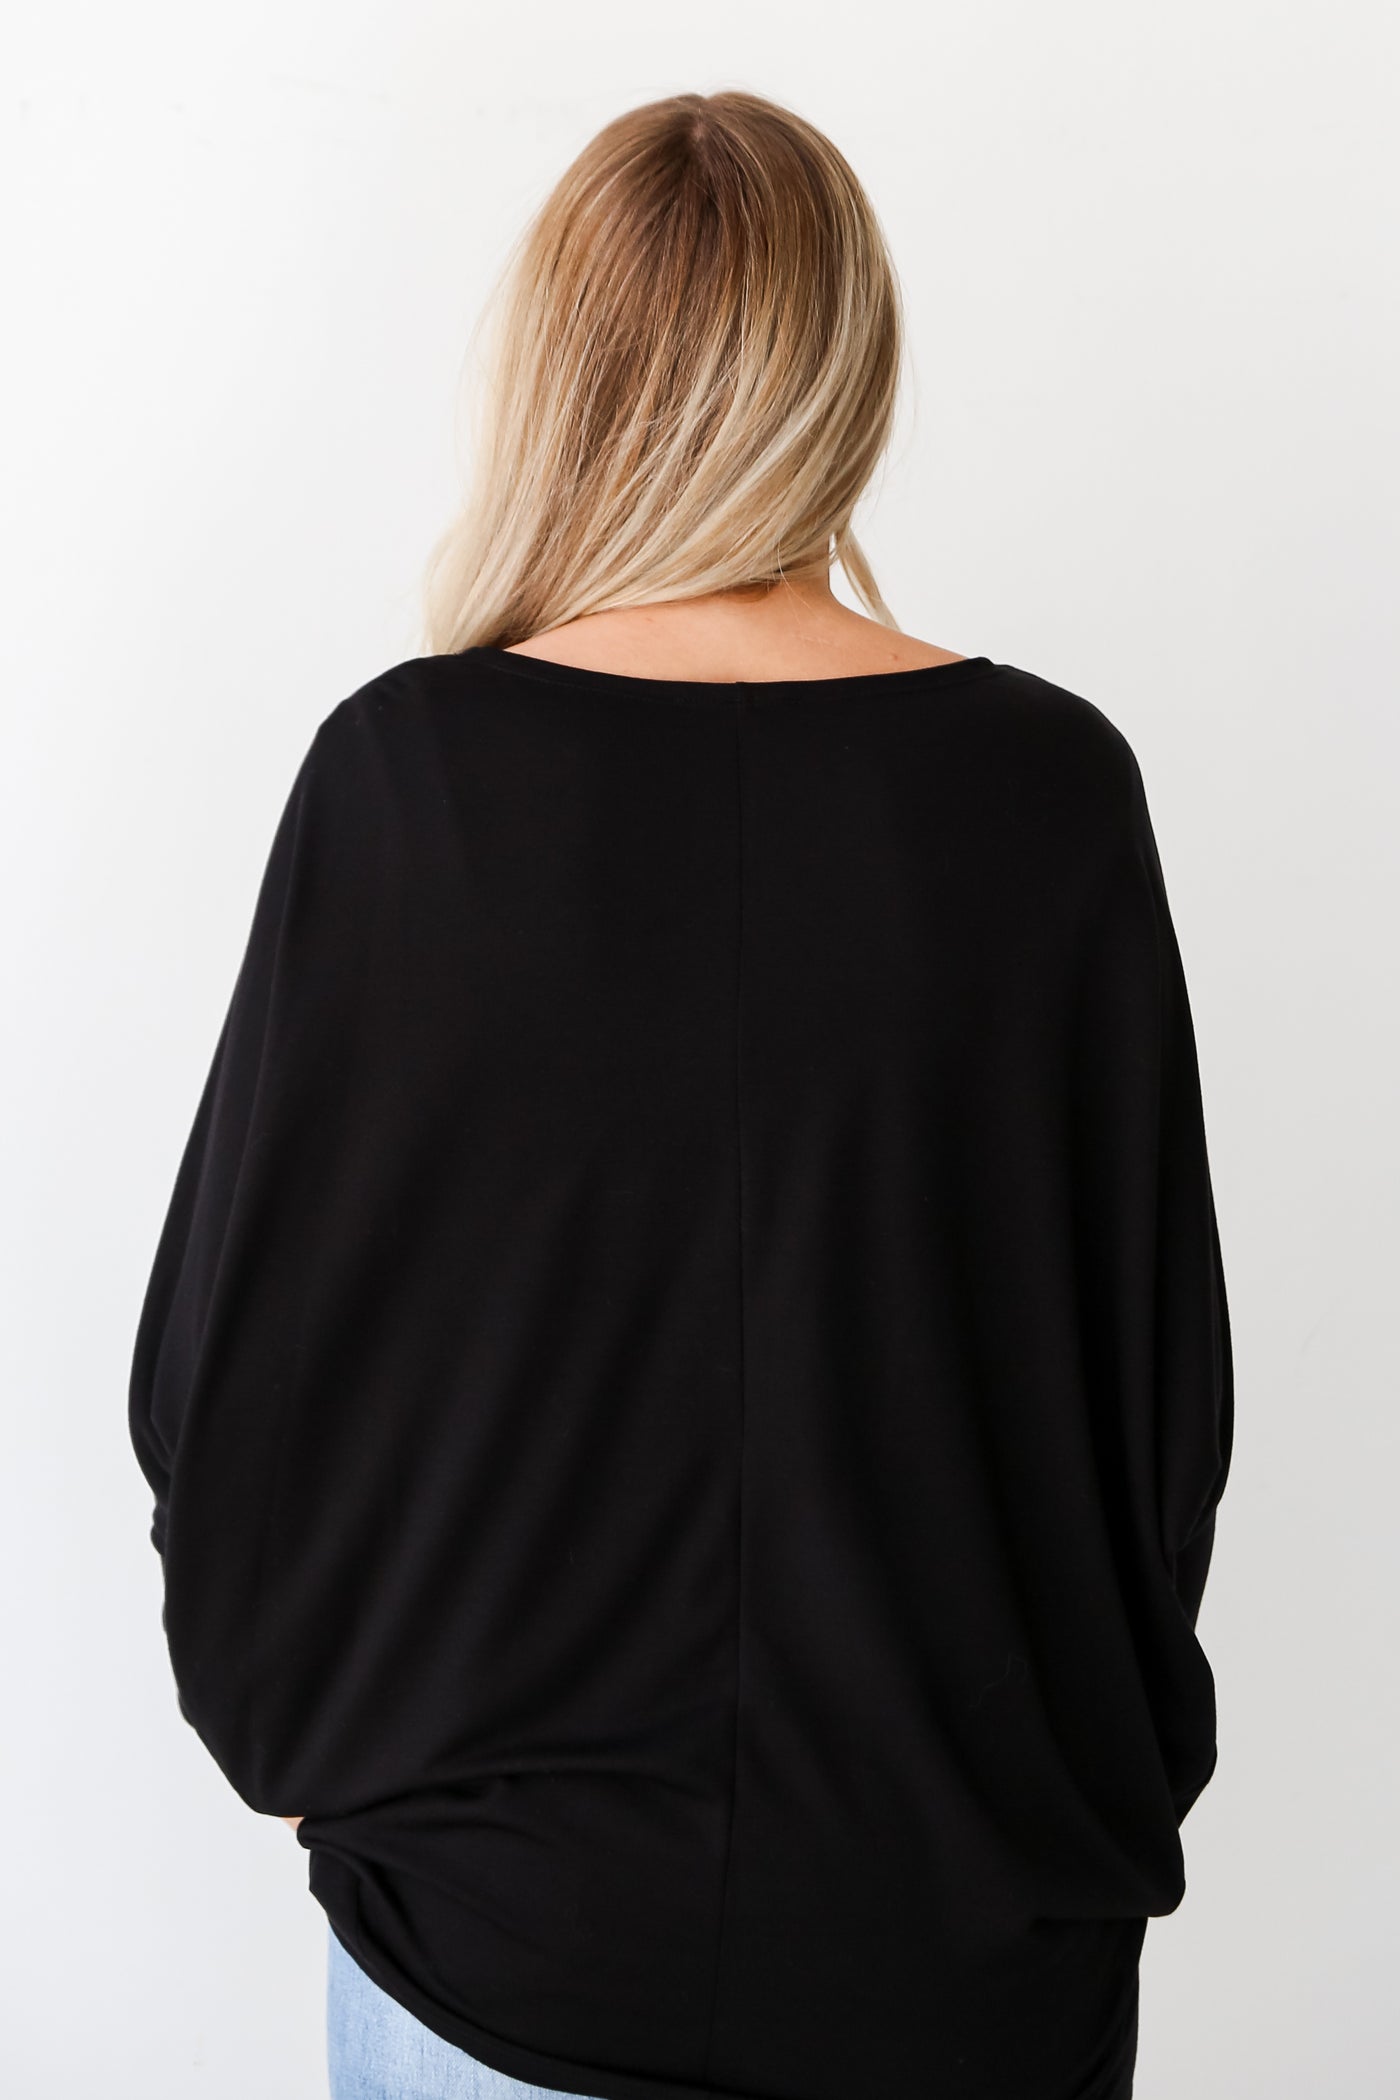 casual black Oversized Top